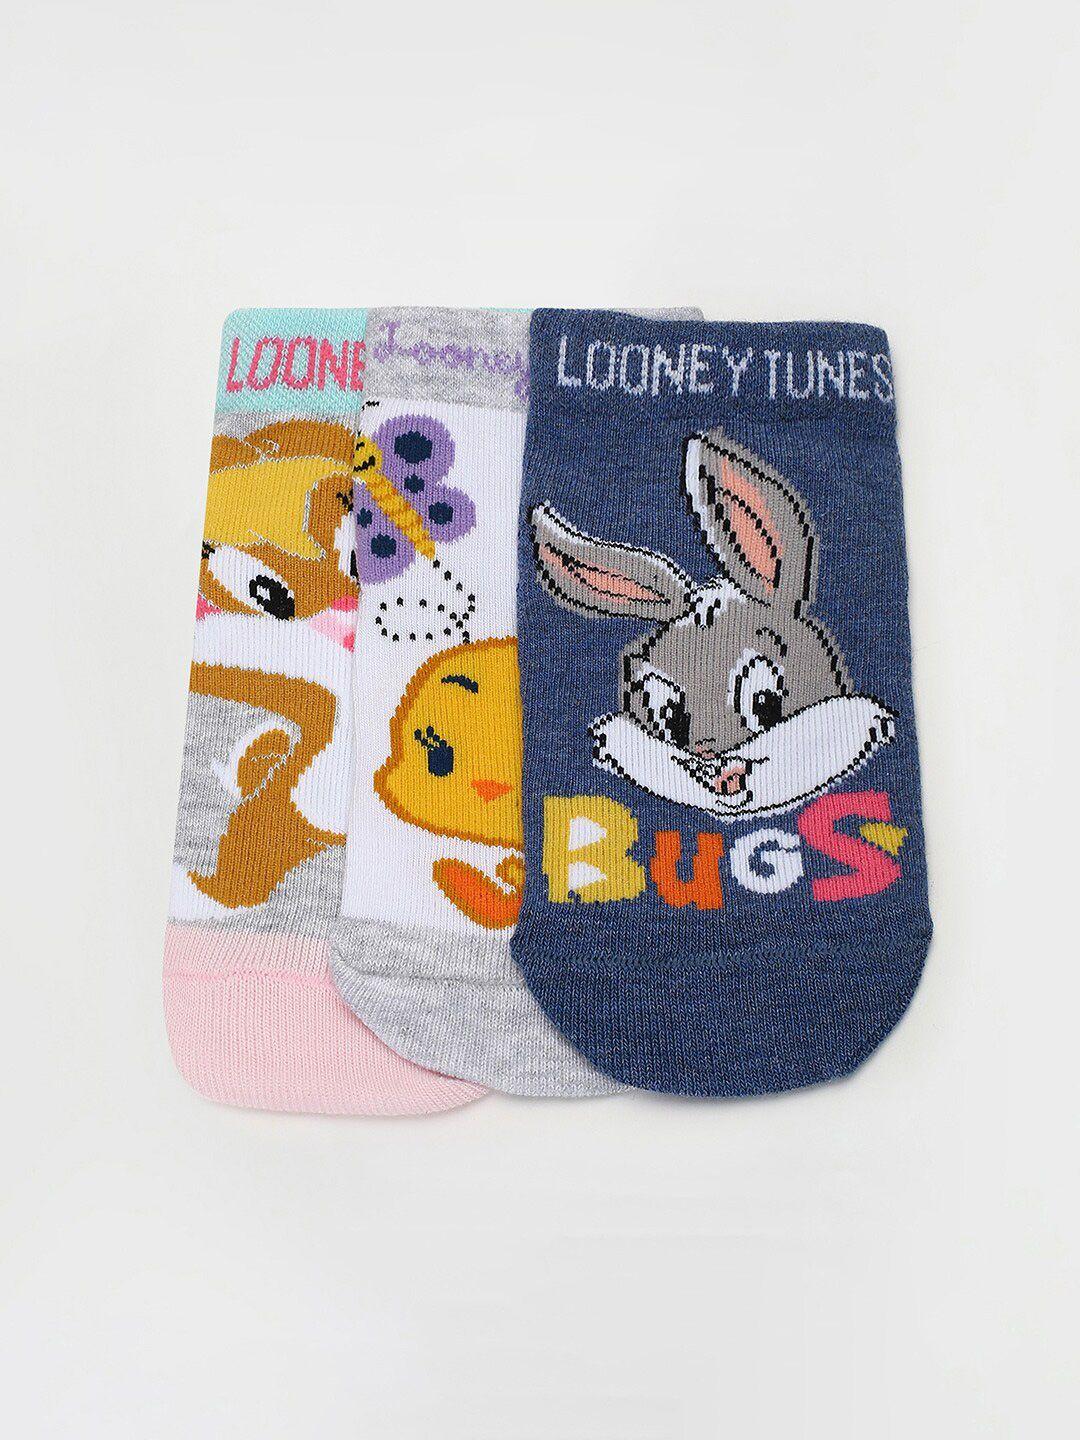 max-girls-pack-of-3-cartoon-patterned-ankle-length-socks